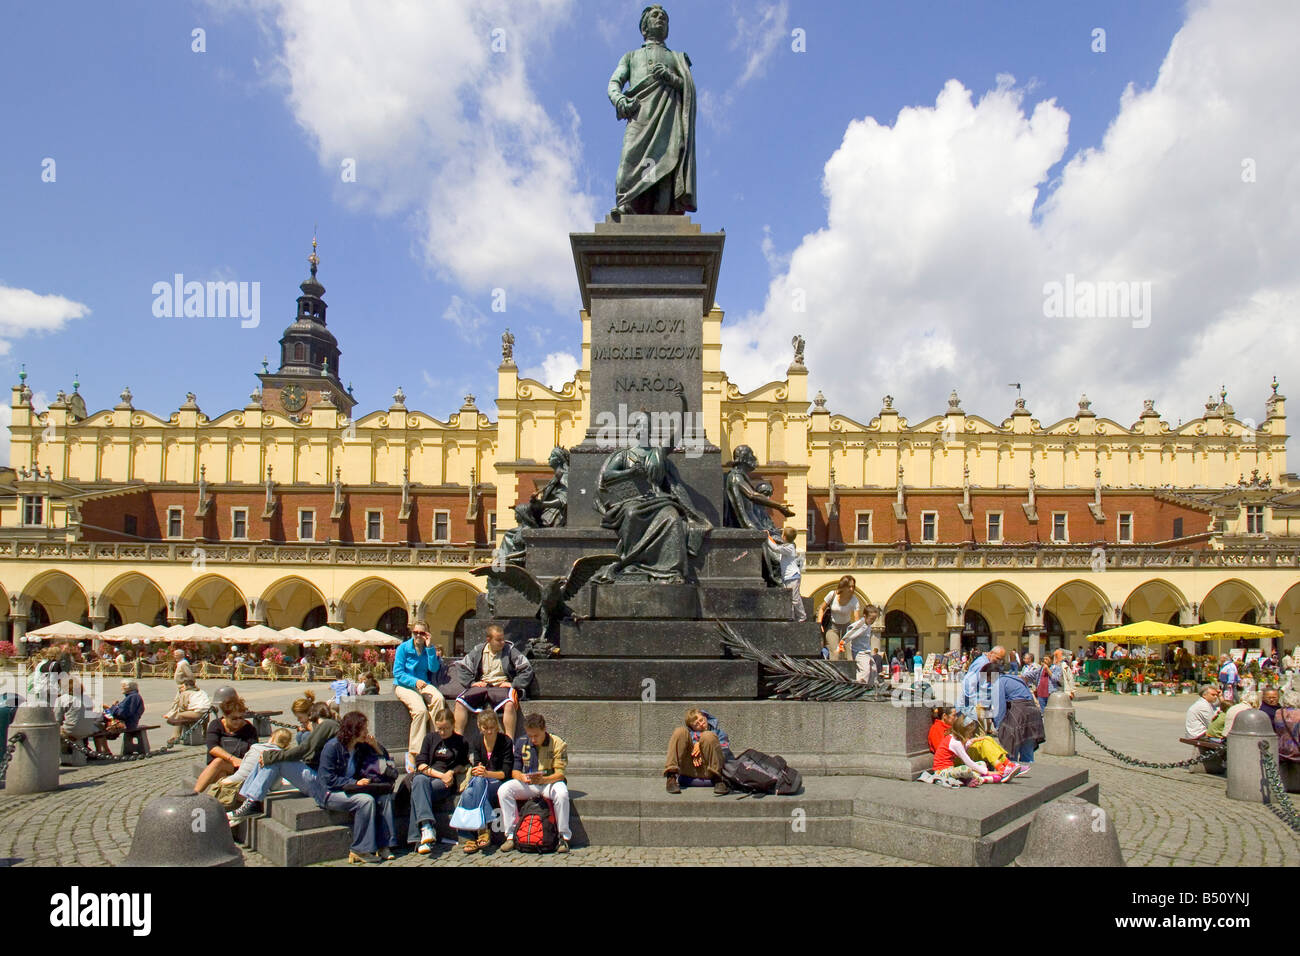 The Adam Mickiewicz Monument in the Main Market Square of Krakow in Poland with the Sukiennice Cloth Hall behind. Stock Photo